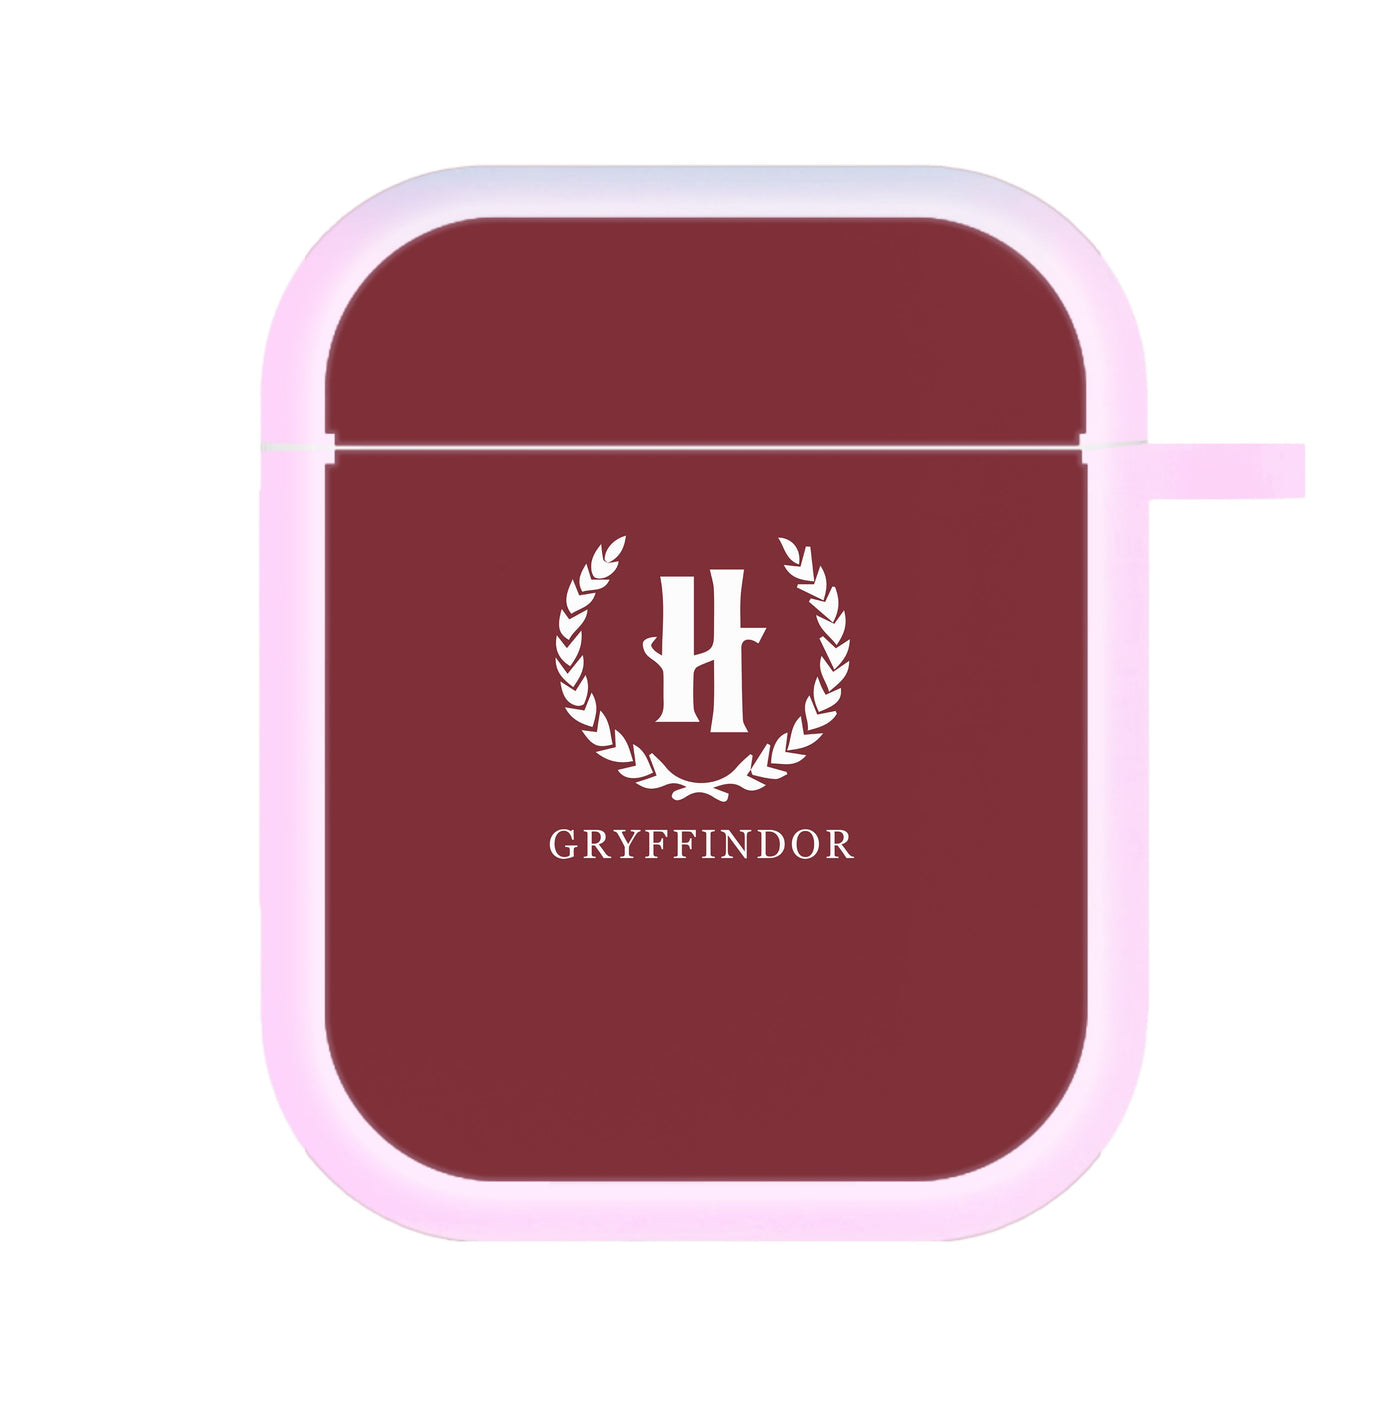 Gryffindor - Harry Potter AirPods Case